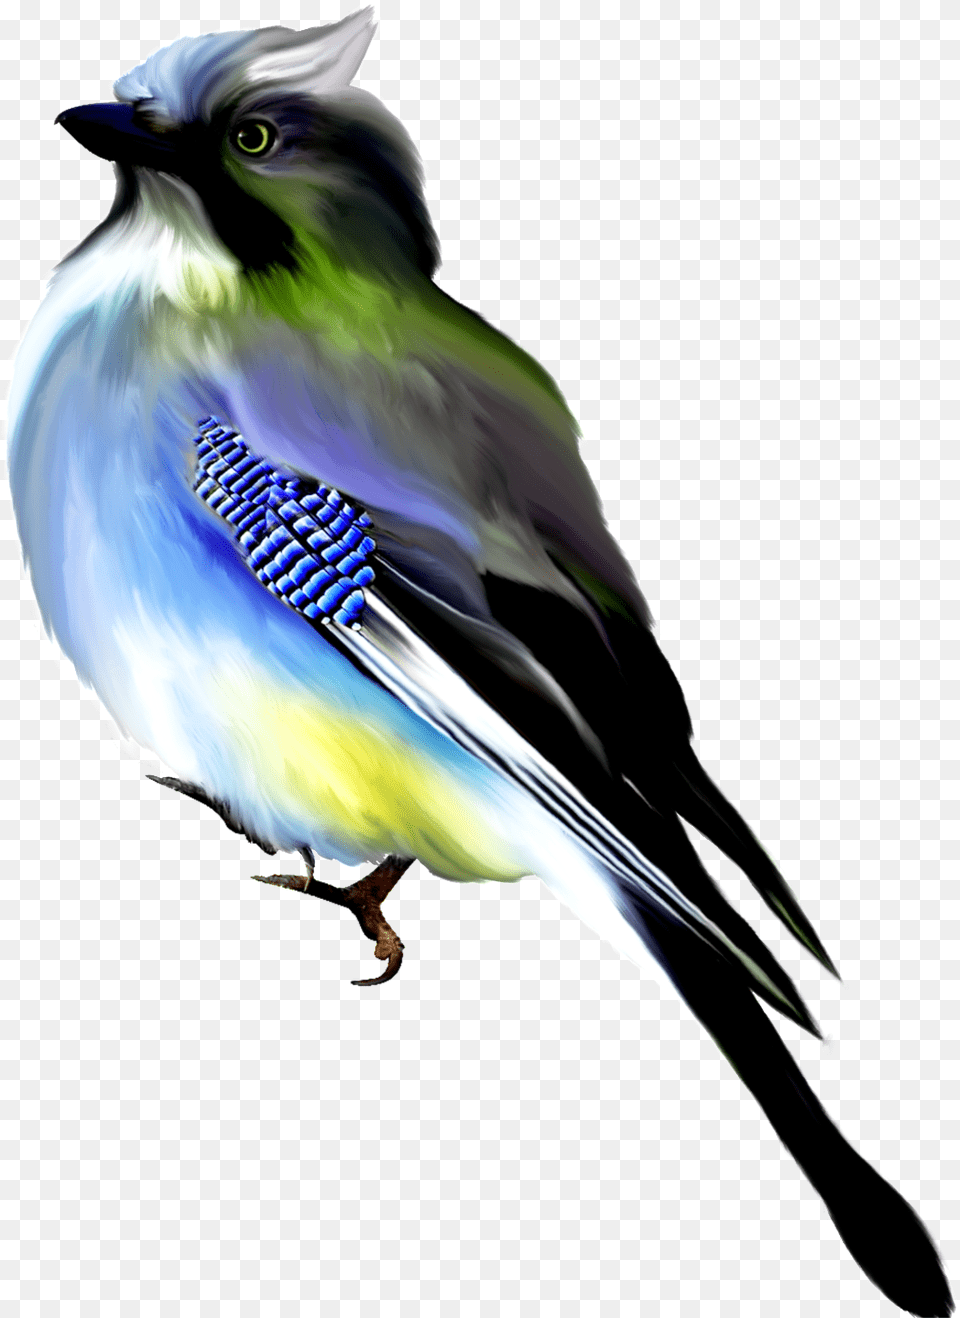 Hand Painted Black Blue Watercolor Bird Transparent Ptici Na Belom Fone, Animal, Jay, Blue Jay, Bluebird Free Png Download